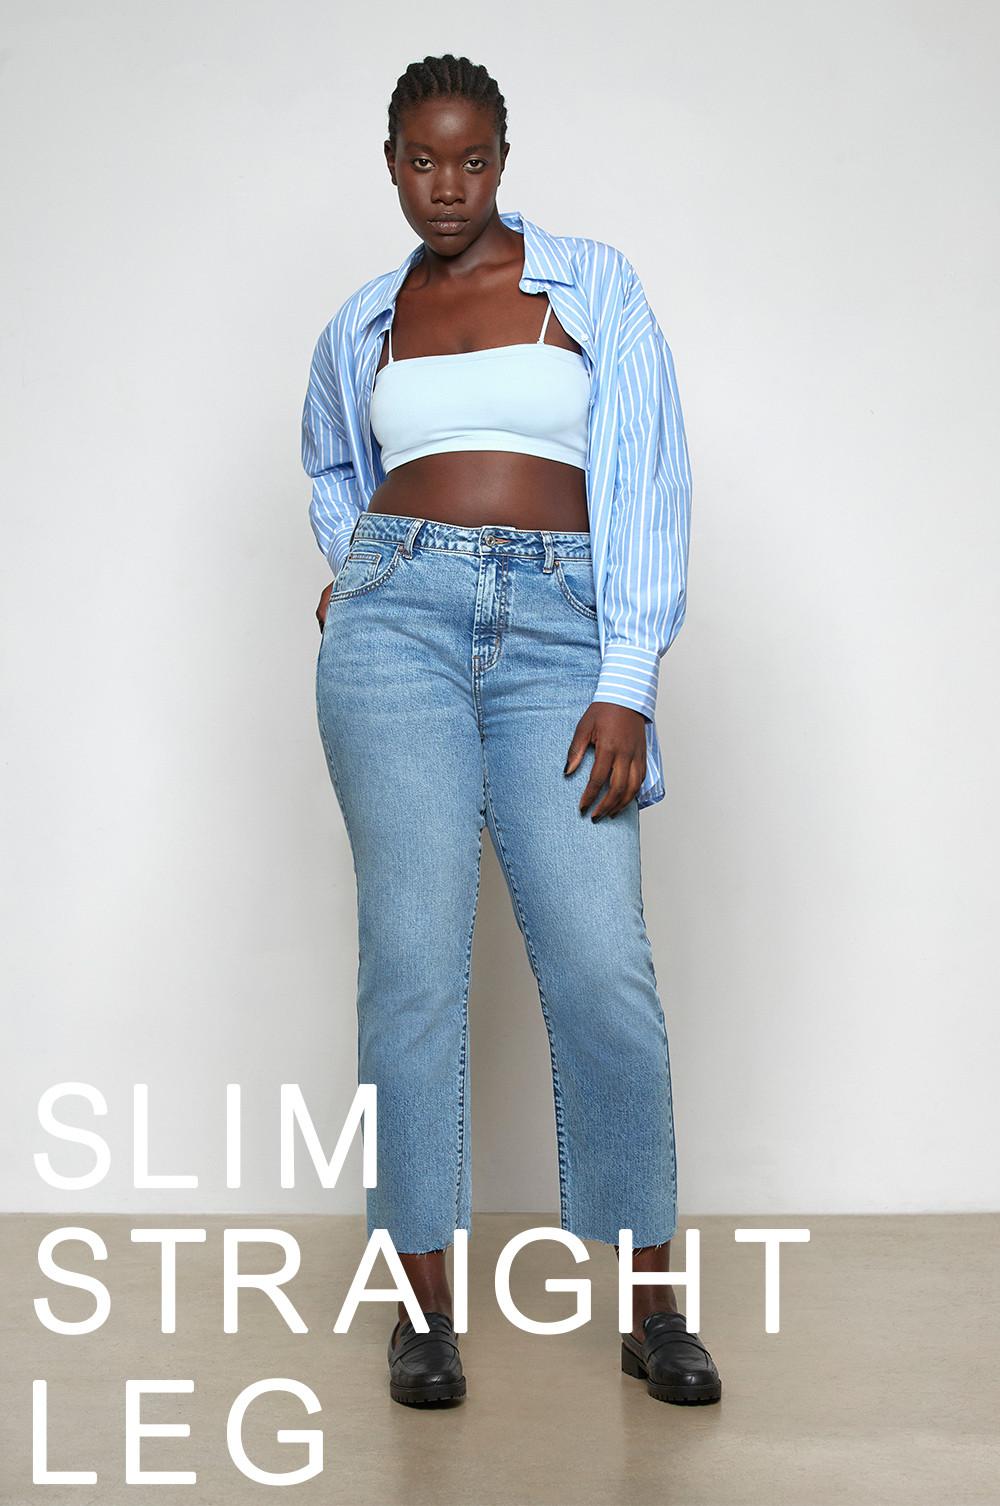 H&M lambasted for 'crazy' difference between their size 16 jeans same-sized  pair from Primark, The Independent